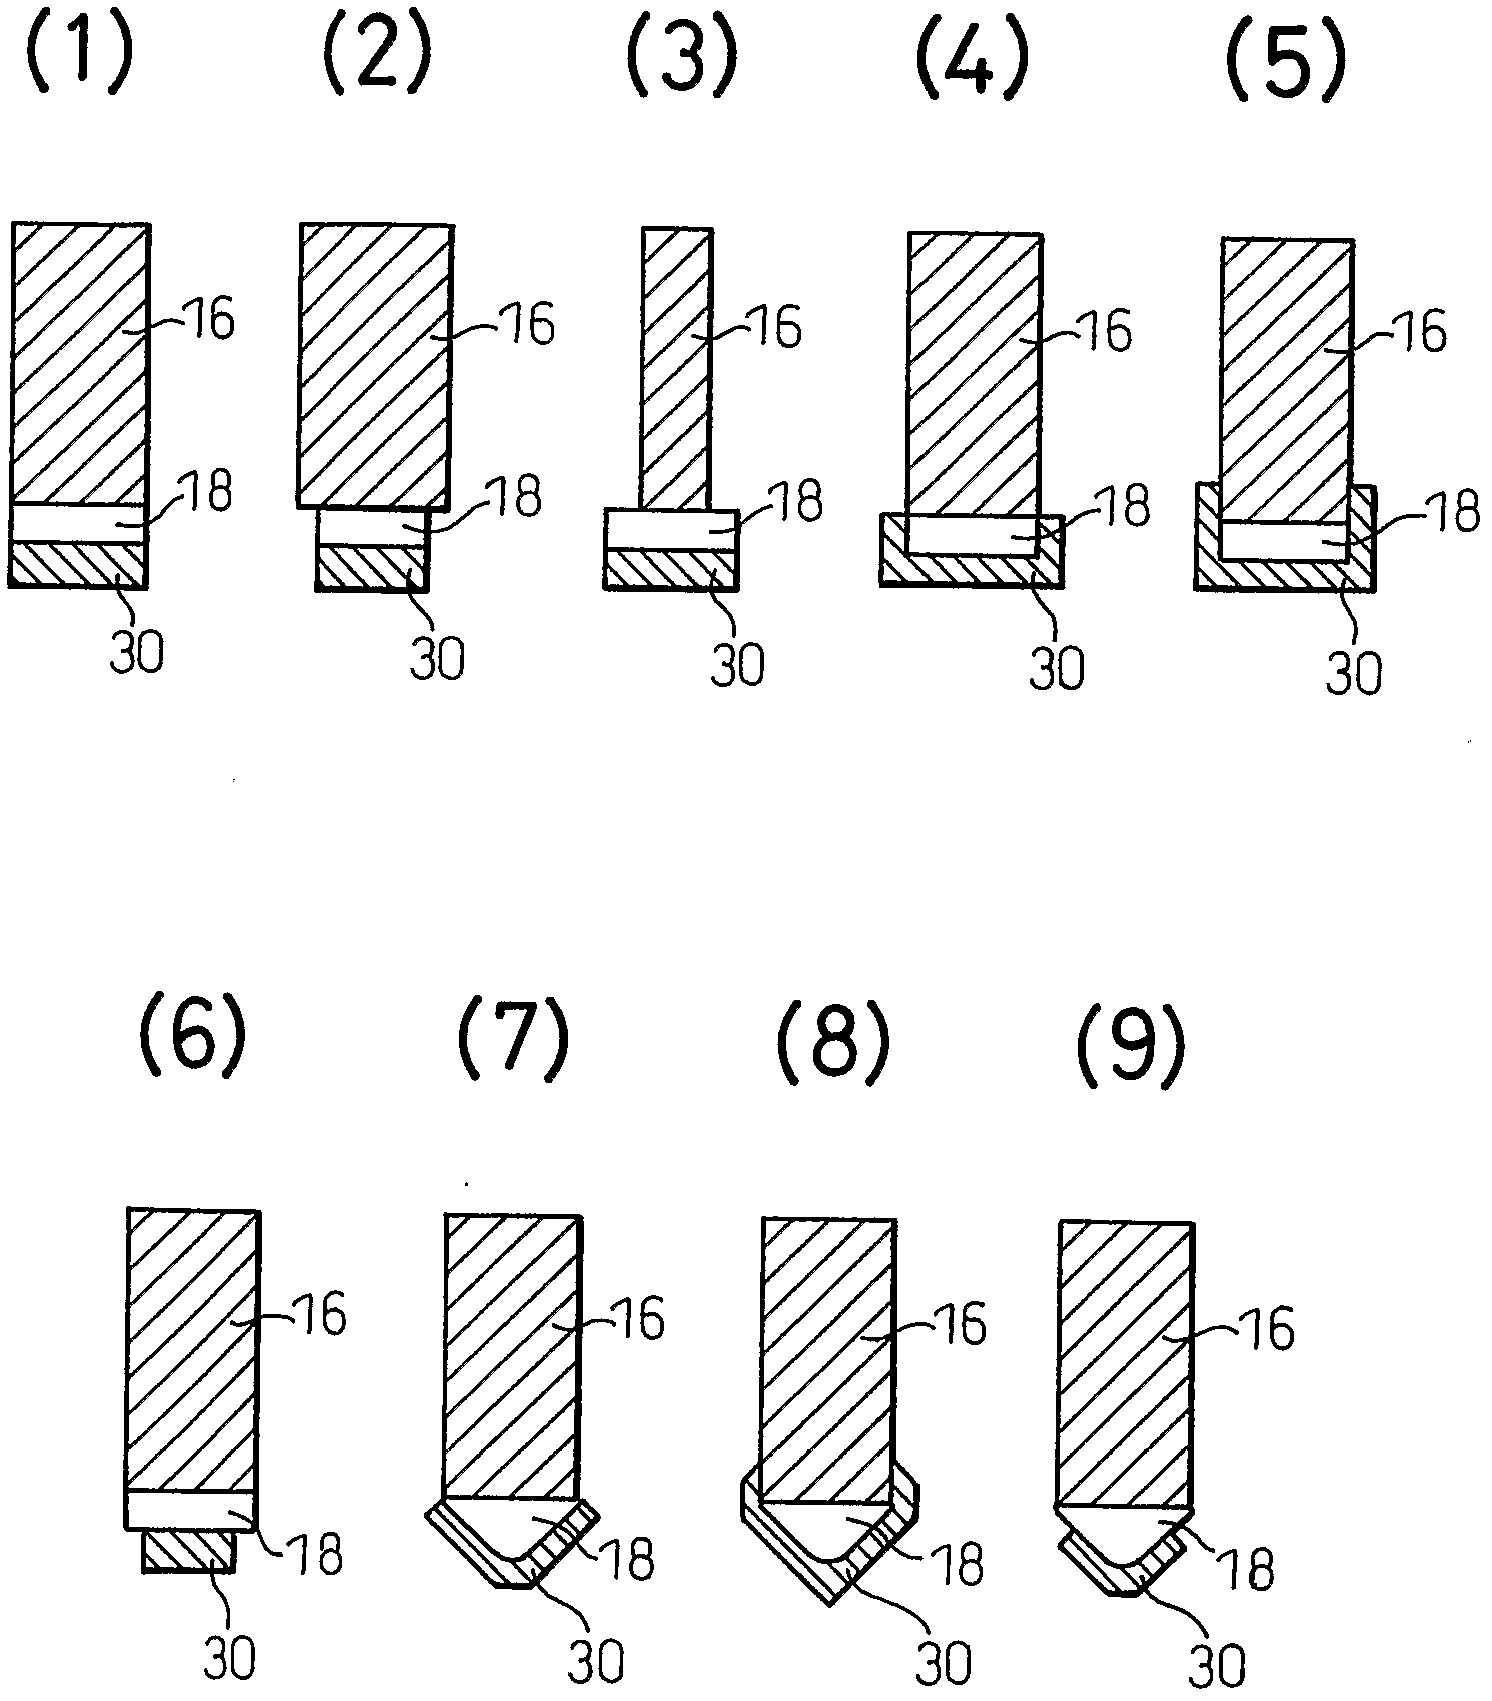 Process for producing SiC single crystal